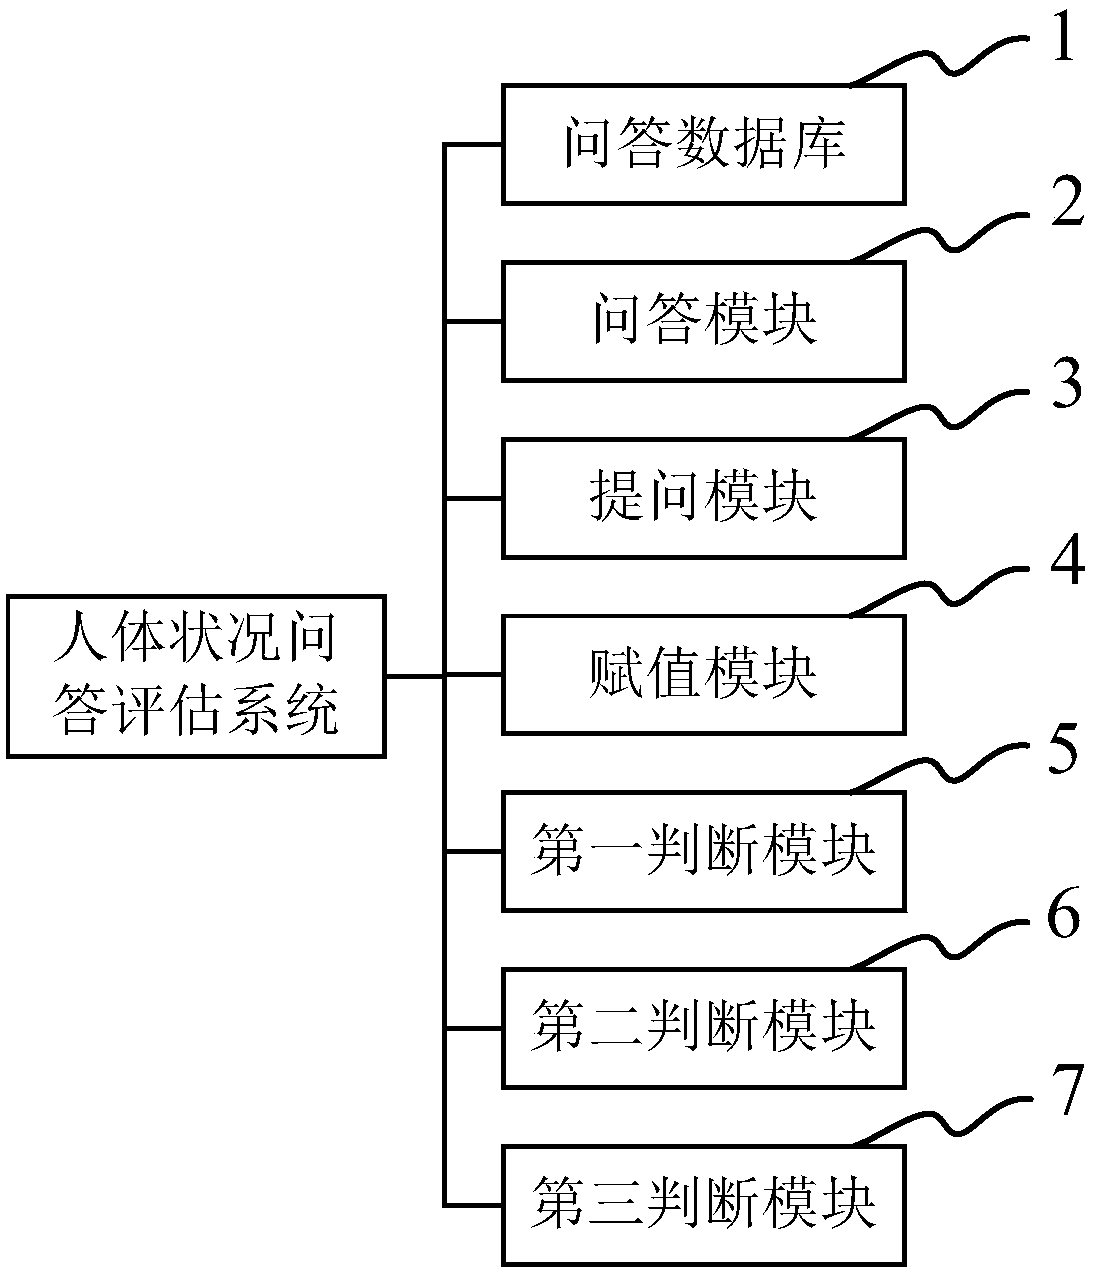 AI-based body condition question and answer evaluation method and system